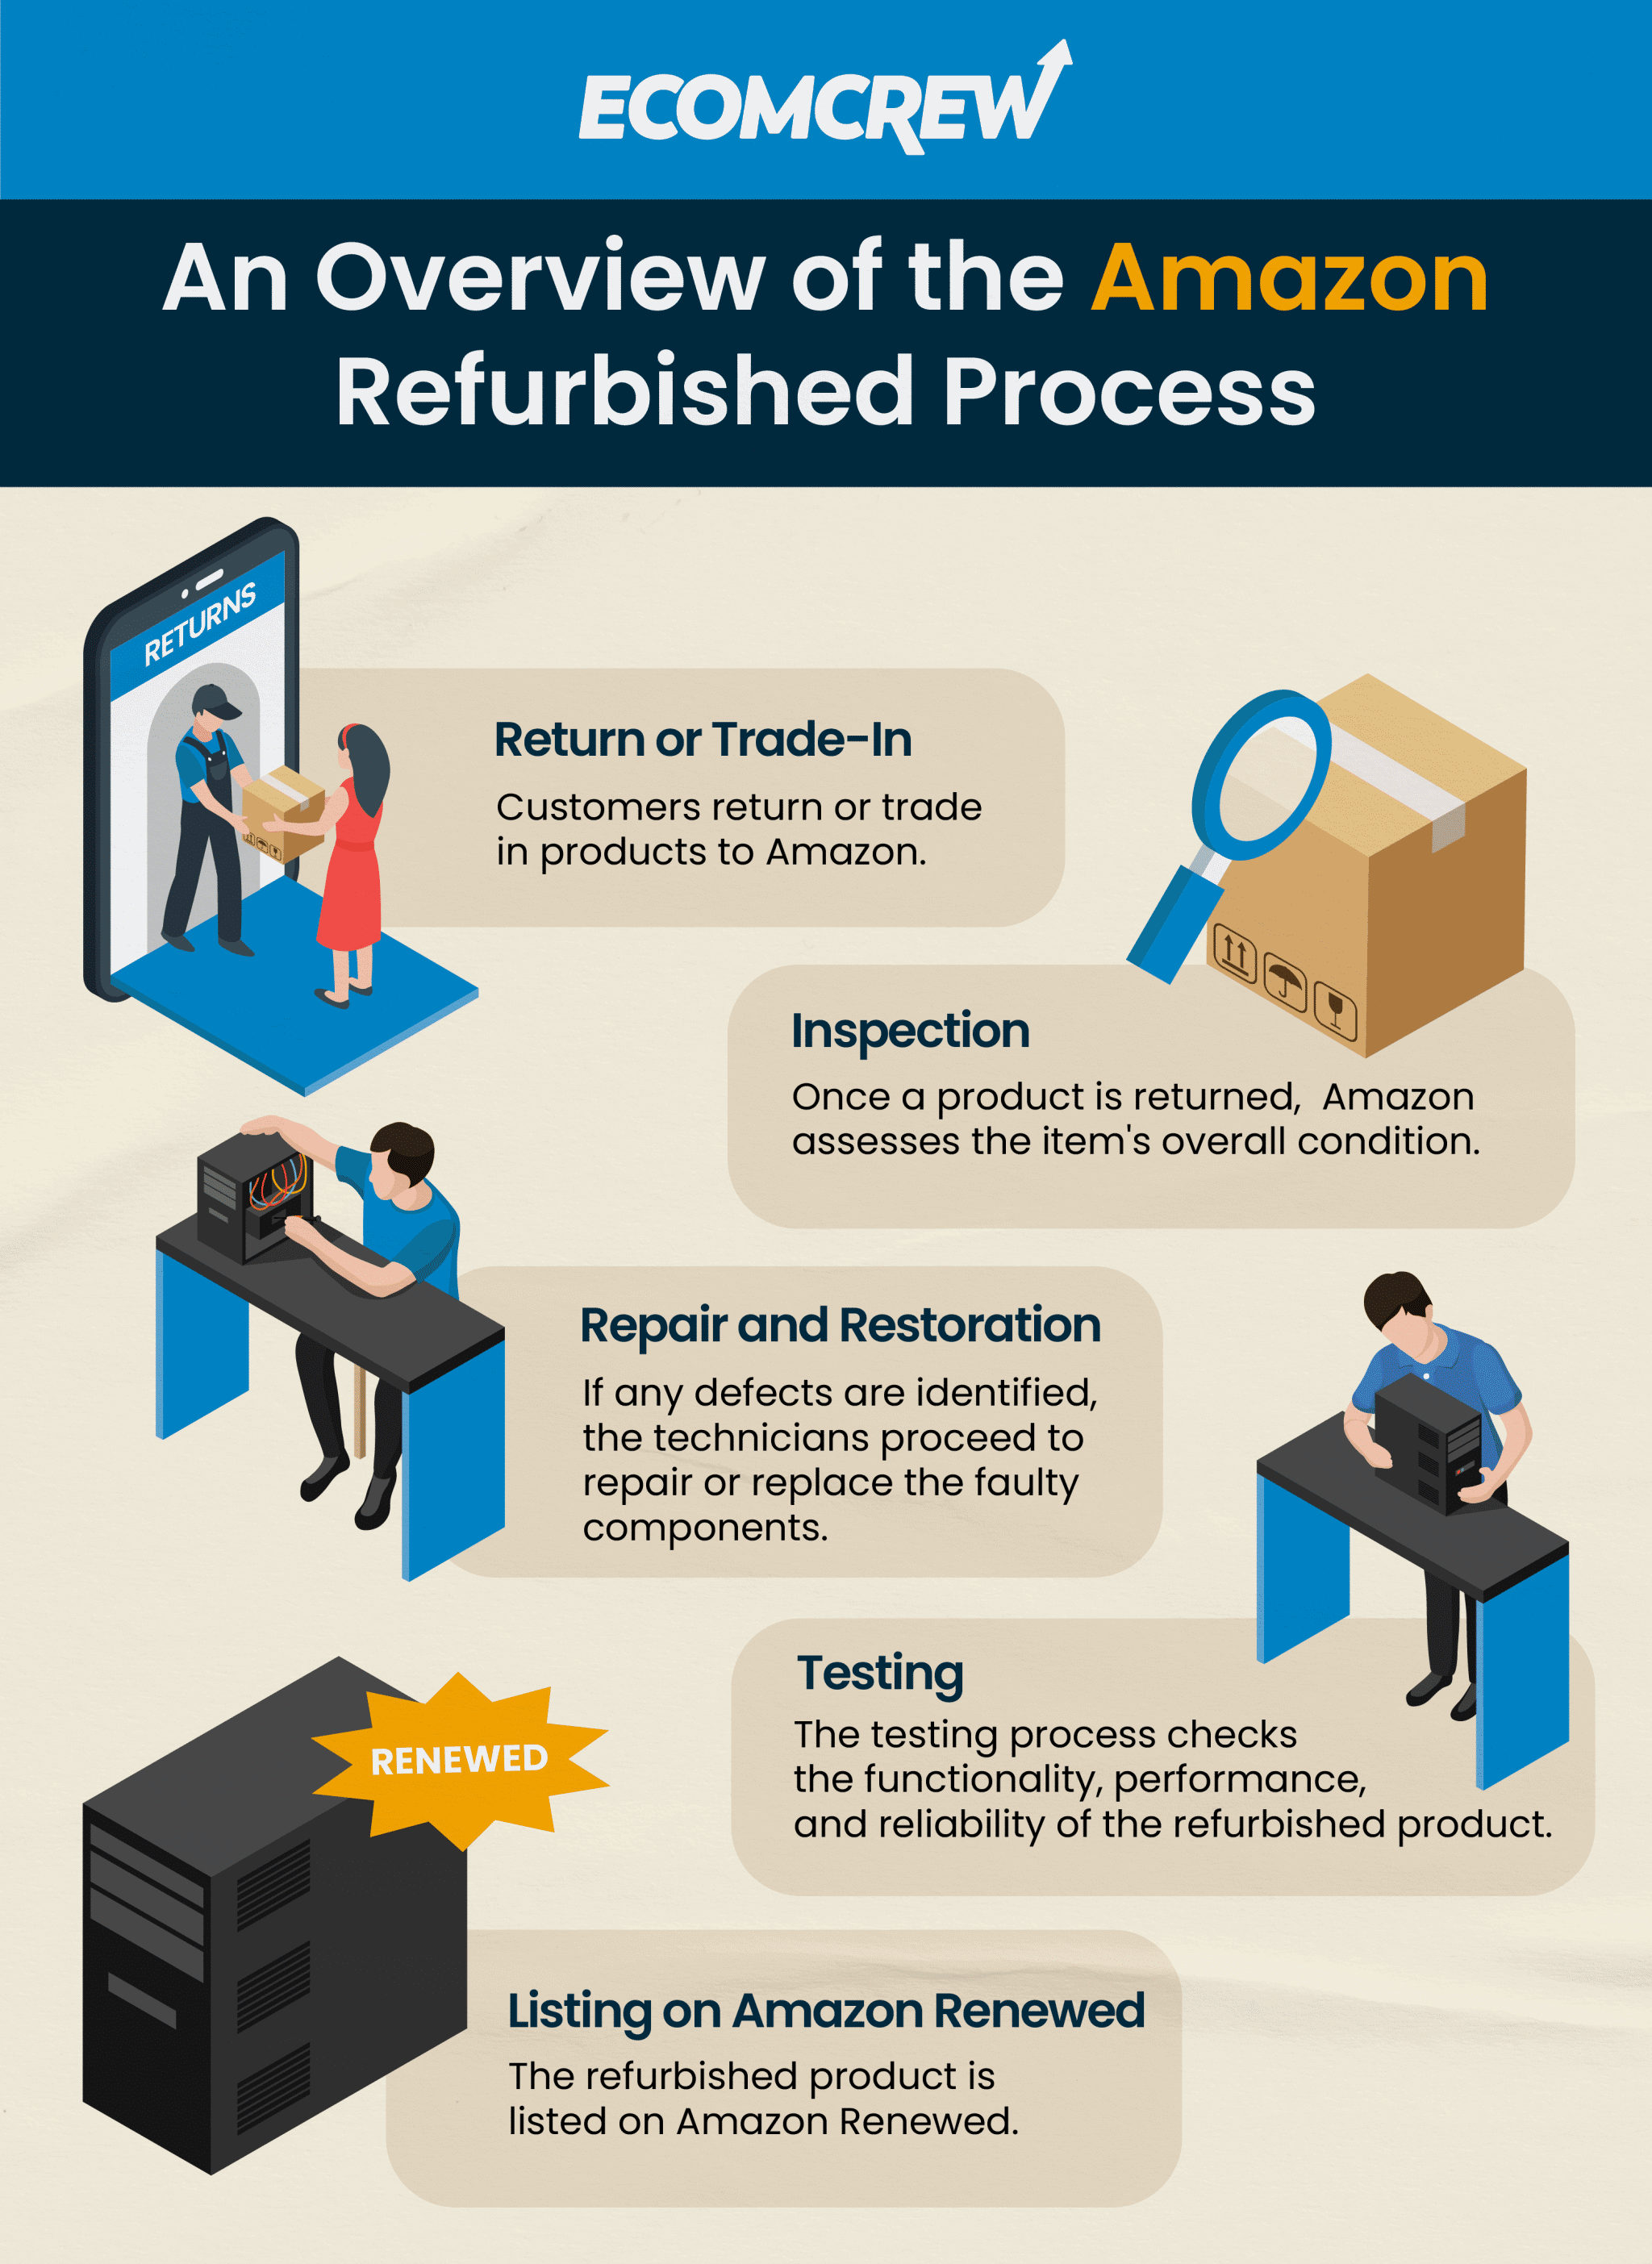 How you can refurbish your product and have it renewed on Amazon.